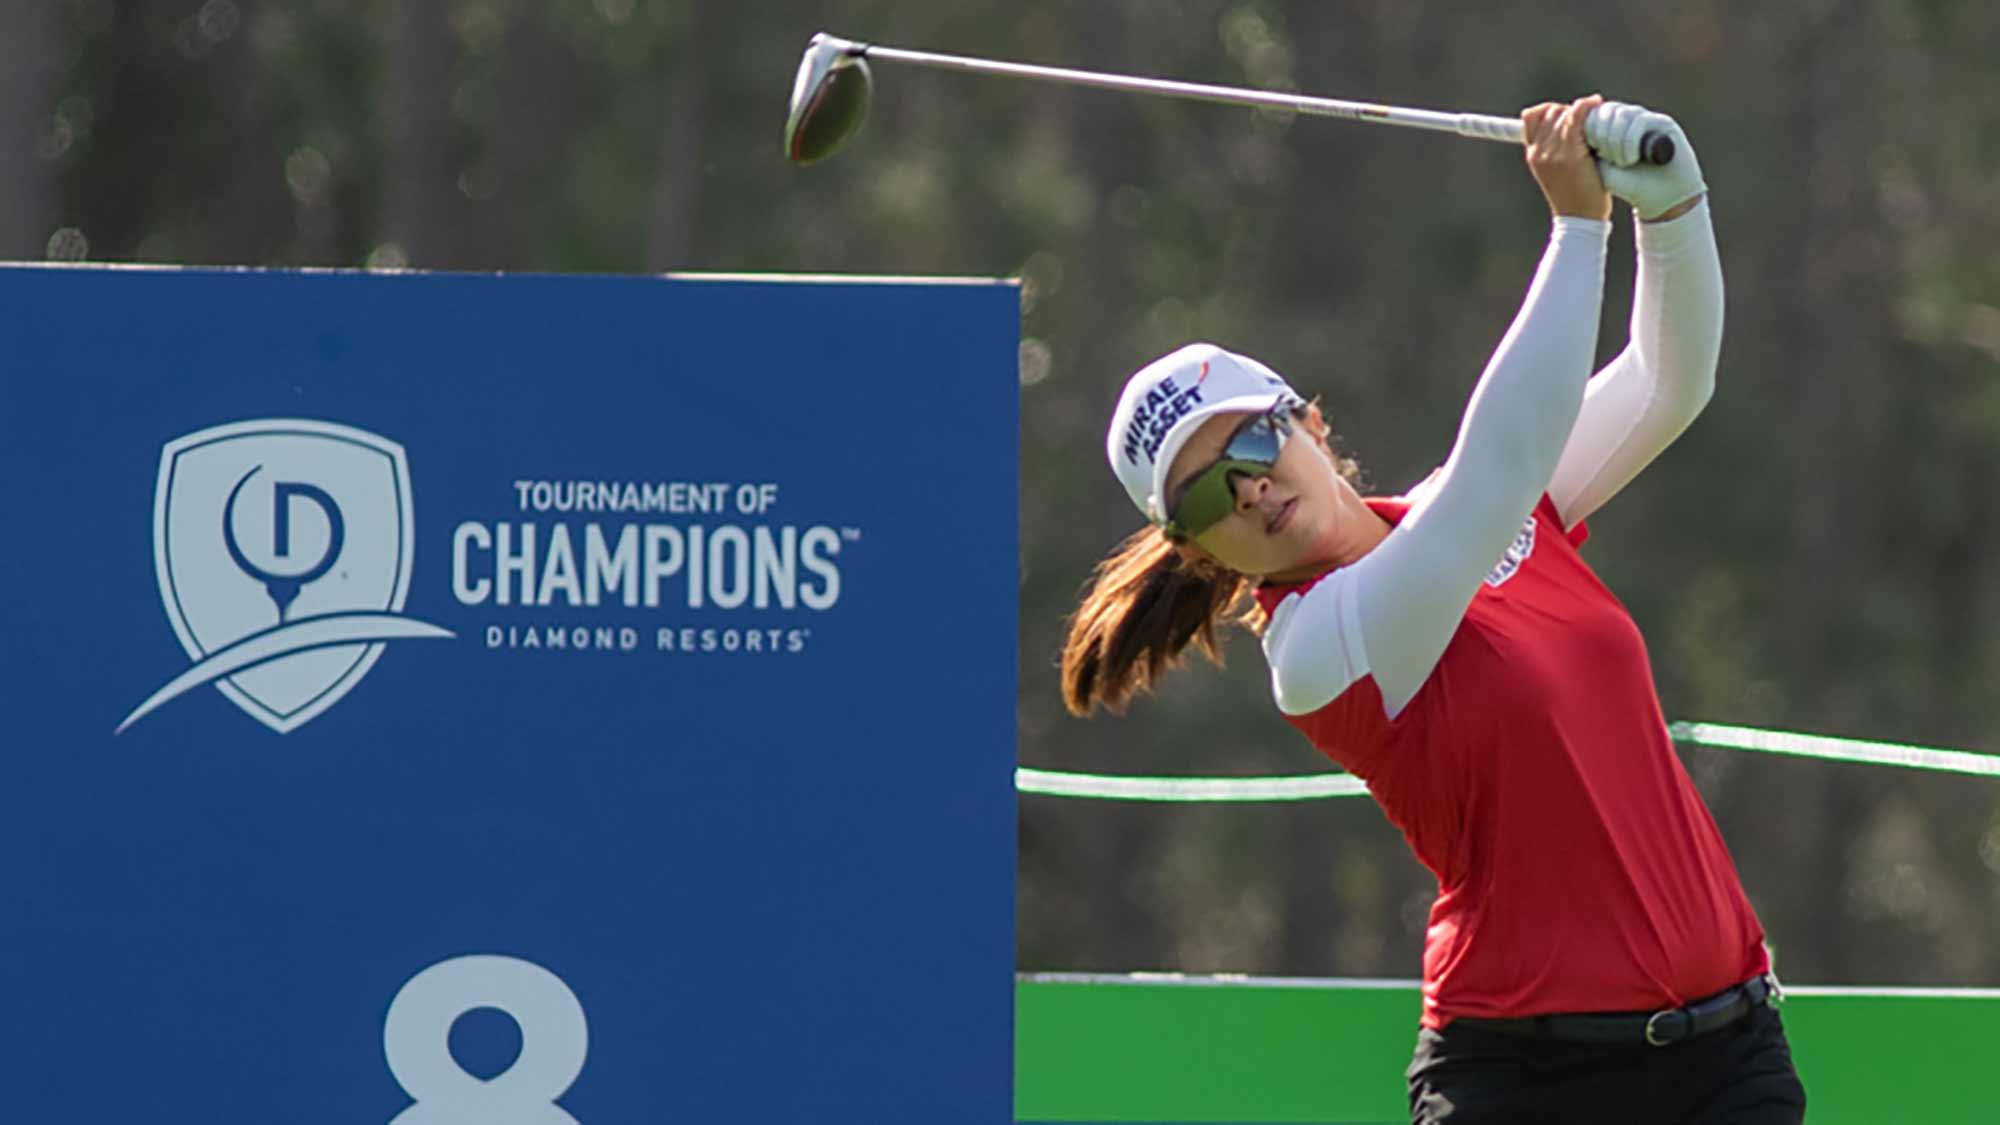 Sei Young Kim watches her tee shot during the opening round of the Diamond Resorts Tournament of Champions presented by Insurance Office of America on January 16, 2020